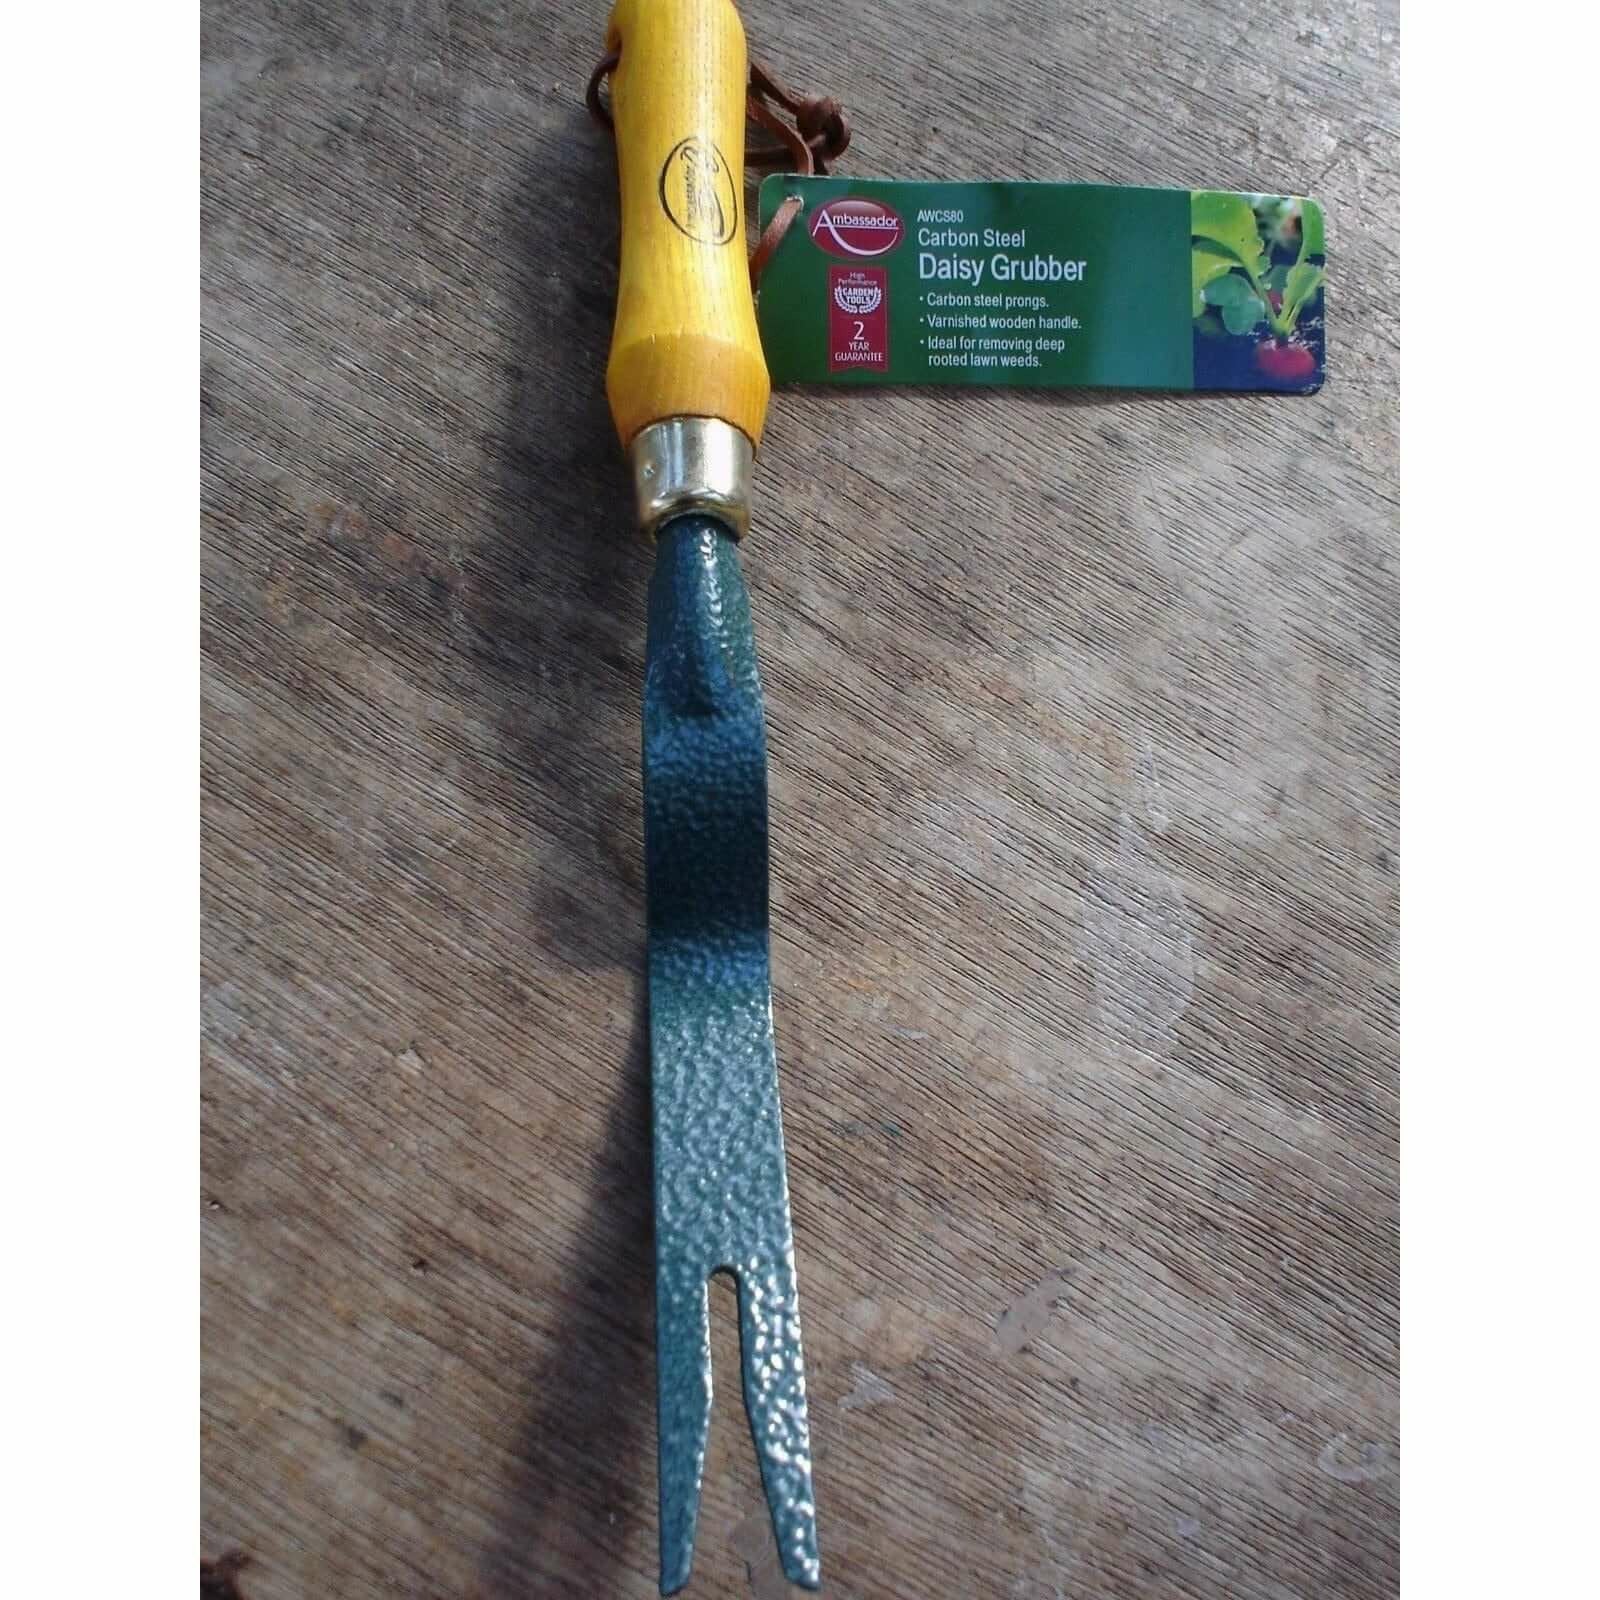 Daisy Grubber, strong construction, varnished wooden handle  from Gardening Requisites 4.99